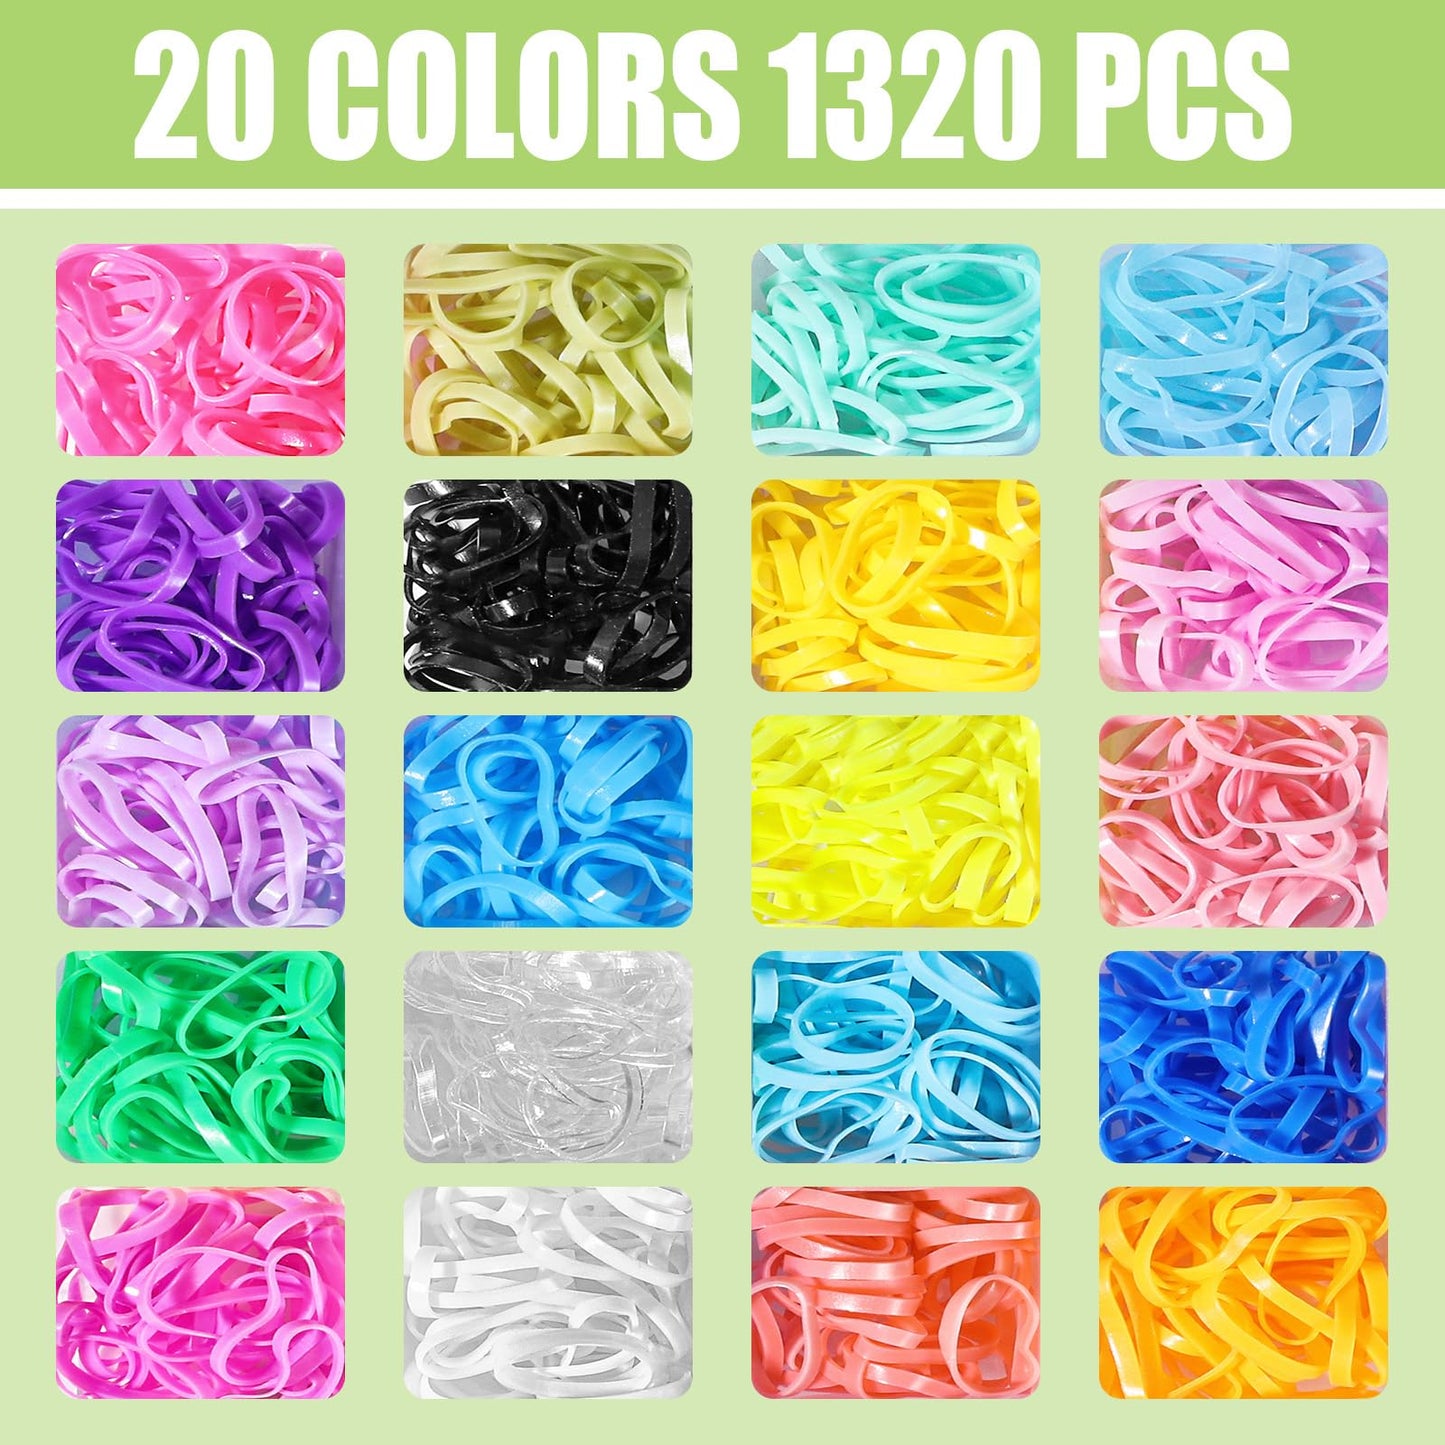 Elastic Hair Ties Hair Accessories for Girl, 1504PCS Hair Rubber Bands with Hair Clips Set